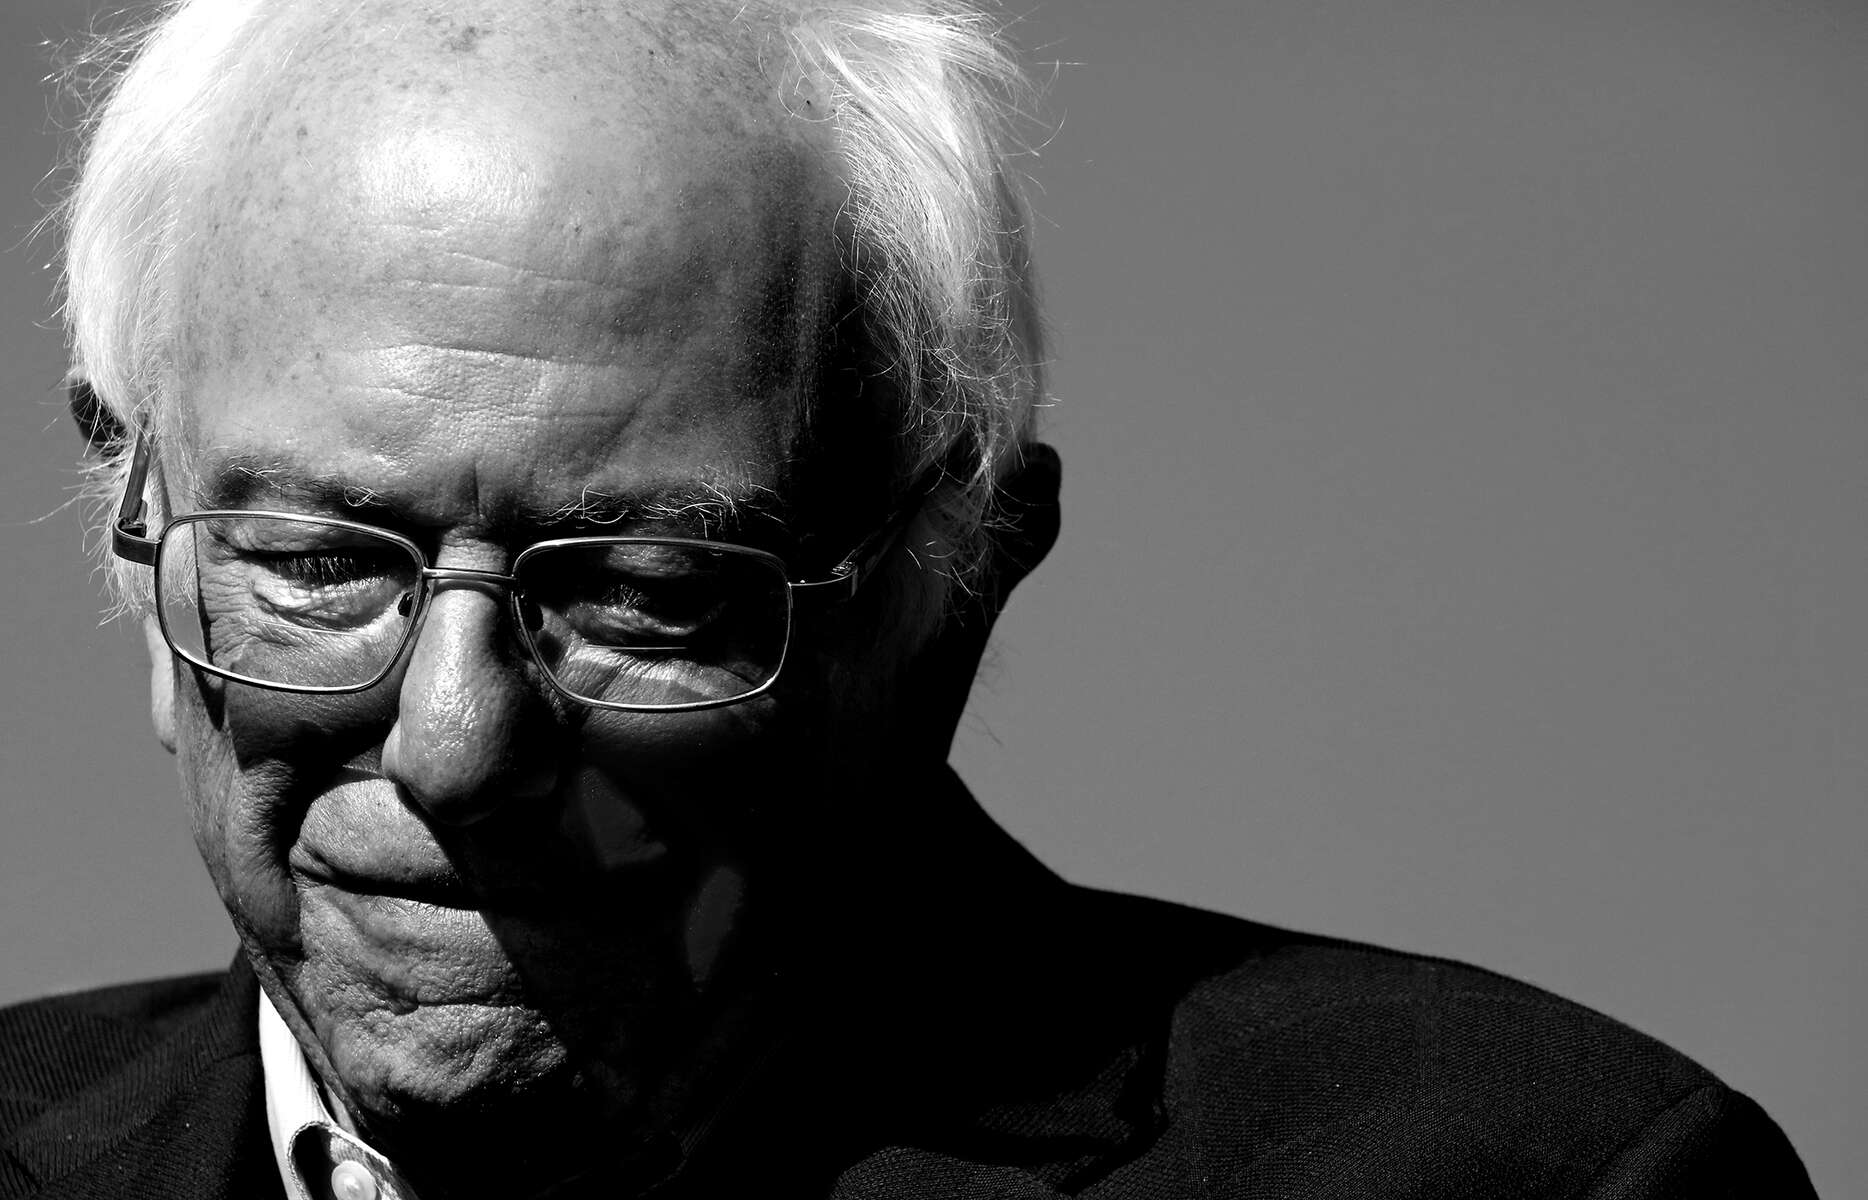 Democratic U.S. presidential candidate and U.S. Senator Bernie Sanders (I-VT) becomes emotional while being greeted by 20,000-person audience upon arriving to a {quote}Bernie's Back{quote} rally at Queensbridge Park in Queens, NY, on October 19, 2019. The rally, at which Representative Alexandria Ocasio-Cortez (D-NY) endorsed Sanders, took place shortly after Sanders was hospitalized for a heart attack at the start of the month. (For Reuters)